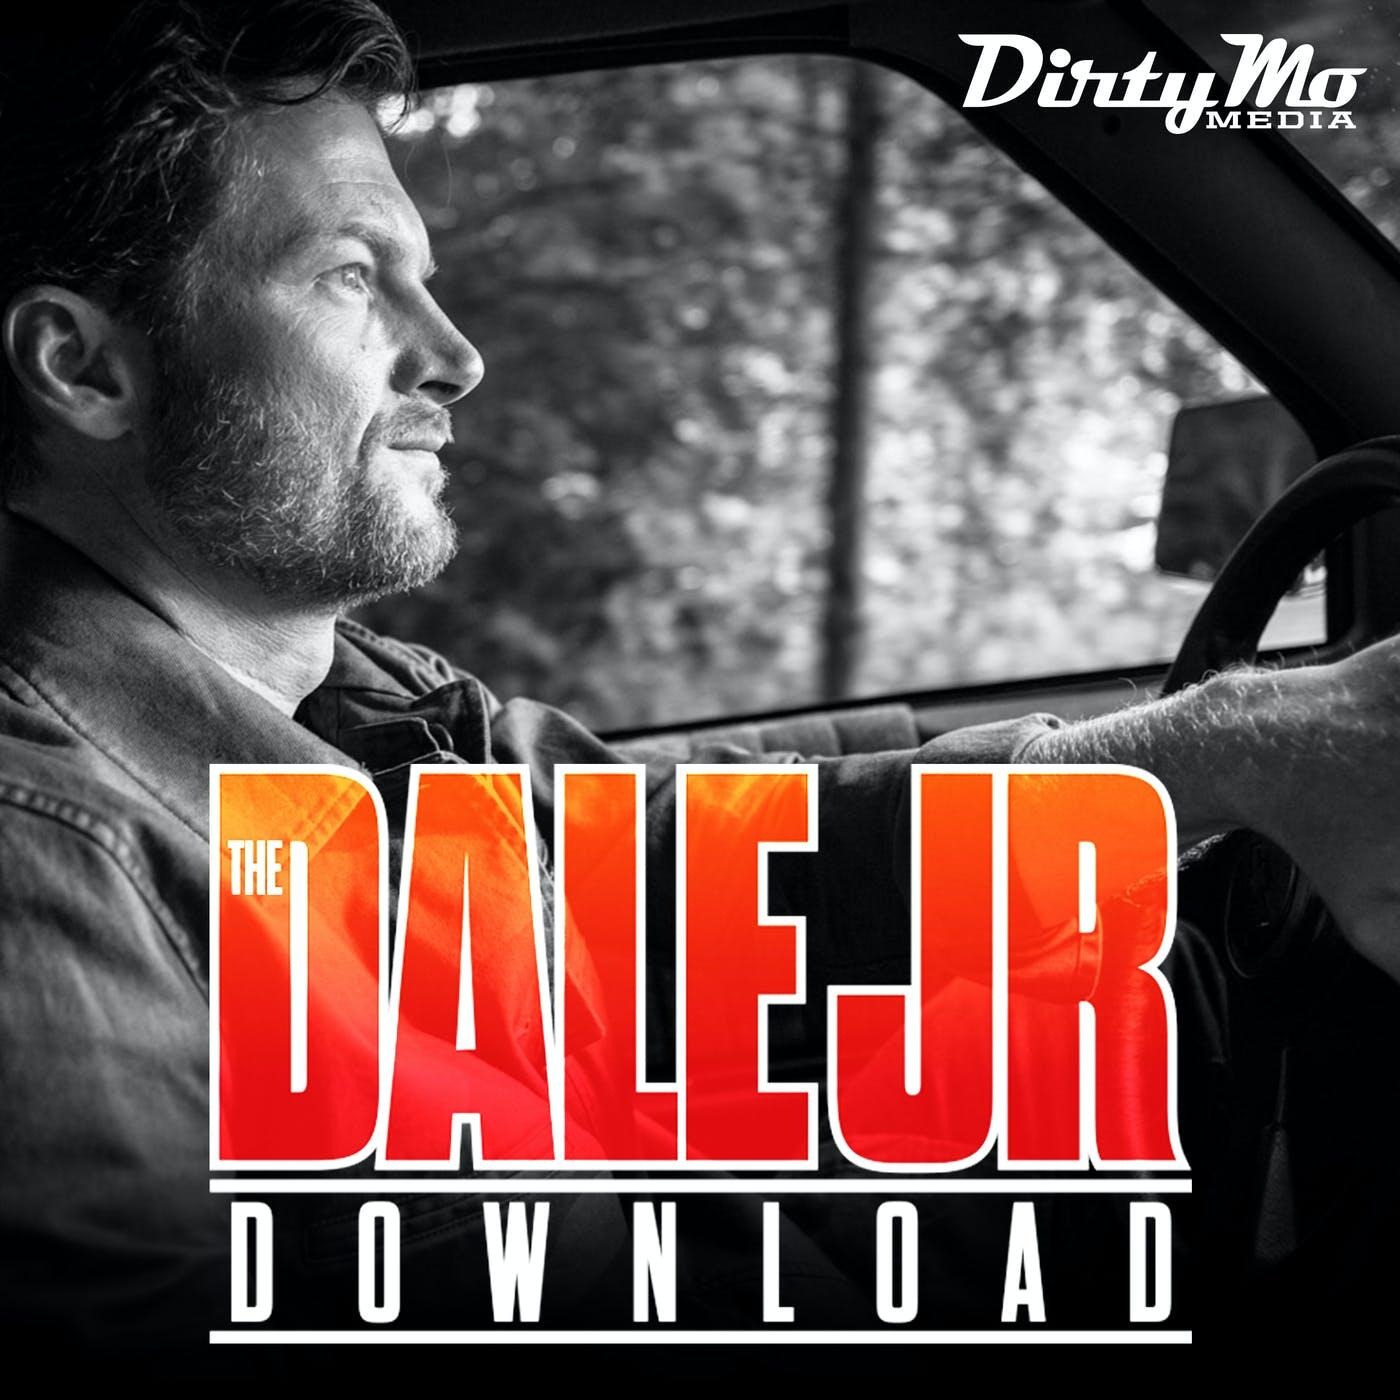 how-to-watch-dale-jr-download